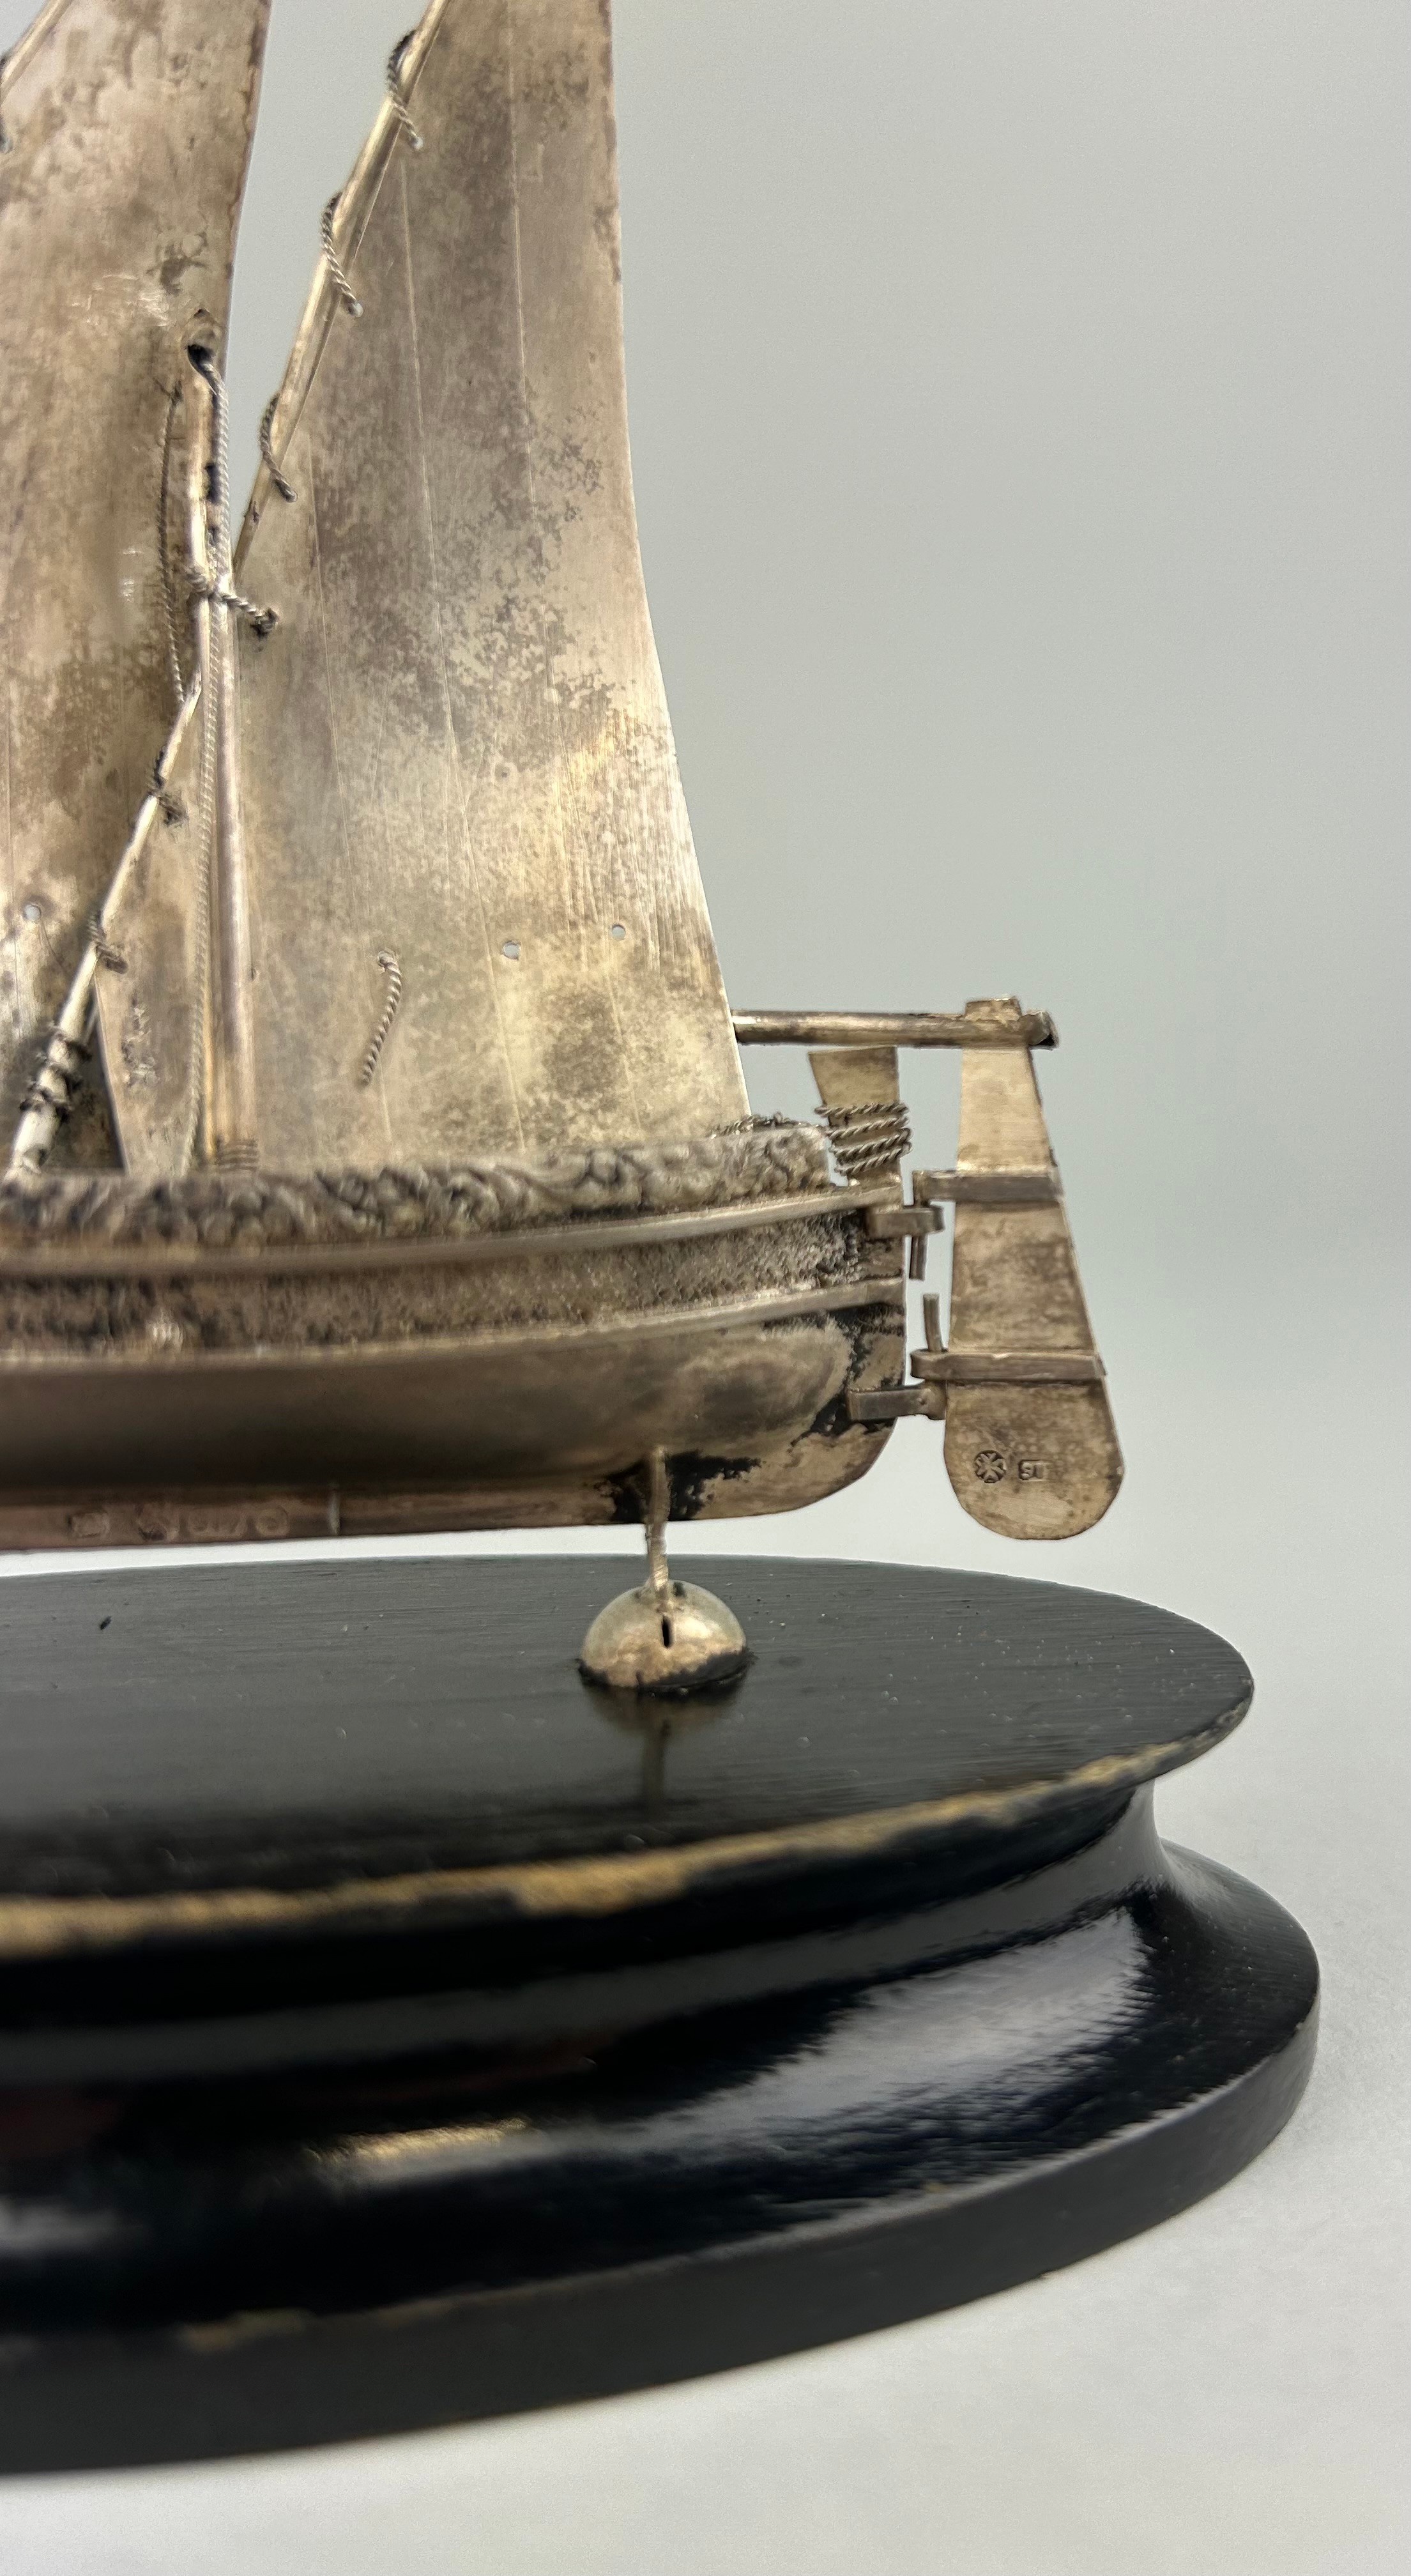 A SILVER JUNK SHIP MOUNTED ON STAND, 12cm x 12cm including stand. - Image 3 of 3